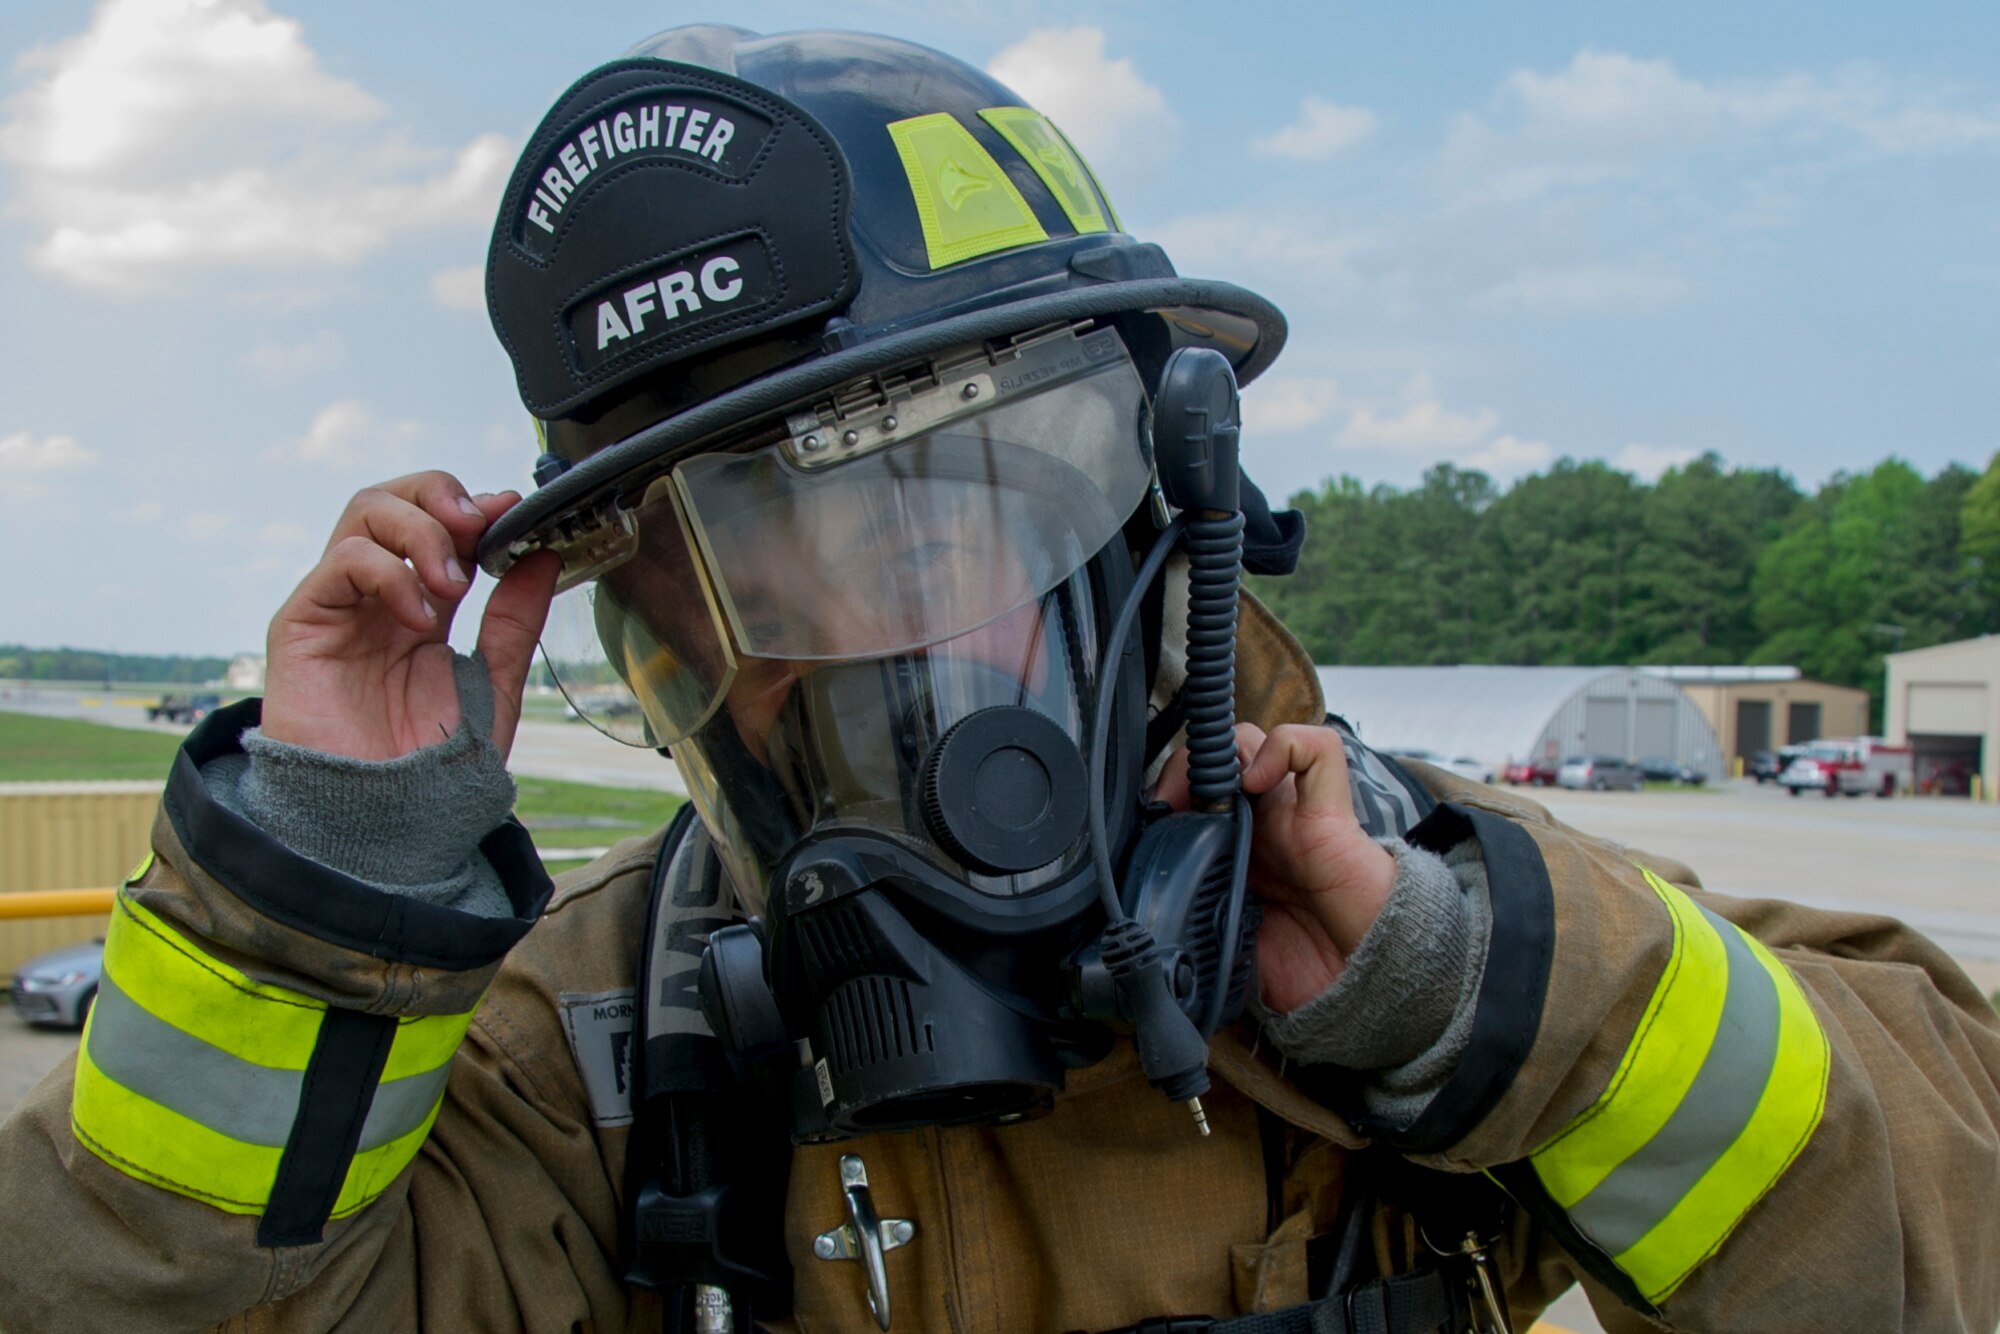 U.S. Air Force Senior Airman David Chaiprakorb, of Kaneohe, Hawaii, and a member of the 624th Civil Engineer Squadron, Joint Base Pearl Harbor-Hickam, Hawaii, prepares his mask during a smoke-filled building simulation to rescue a downed firefighter during the first-ever Air Force Reserve Command Firefighter Rescue and Survival Course at Dobbins Air Reserve Base, Ga., April 18, 2017. Twenty Citizen Airmen participated in the intense 50-hour course held at the 622nd Civil Engineer Group expeditionary combat support-training certification center, which focused on a Rapid Intervention Crew, or RIC. The RIC is a dedicated and specially trained group of firefighters whose responsibilities include safely evacuating a distressed firefighter from a structure. (U.S. Air Force photo by Master Sgt. Theanne K. Herrmann)